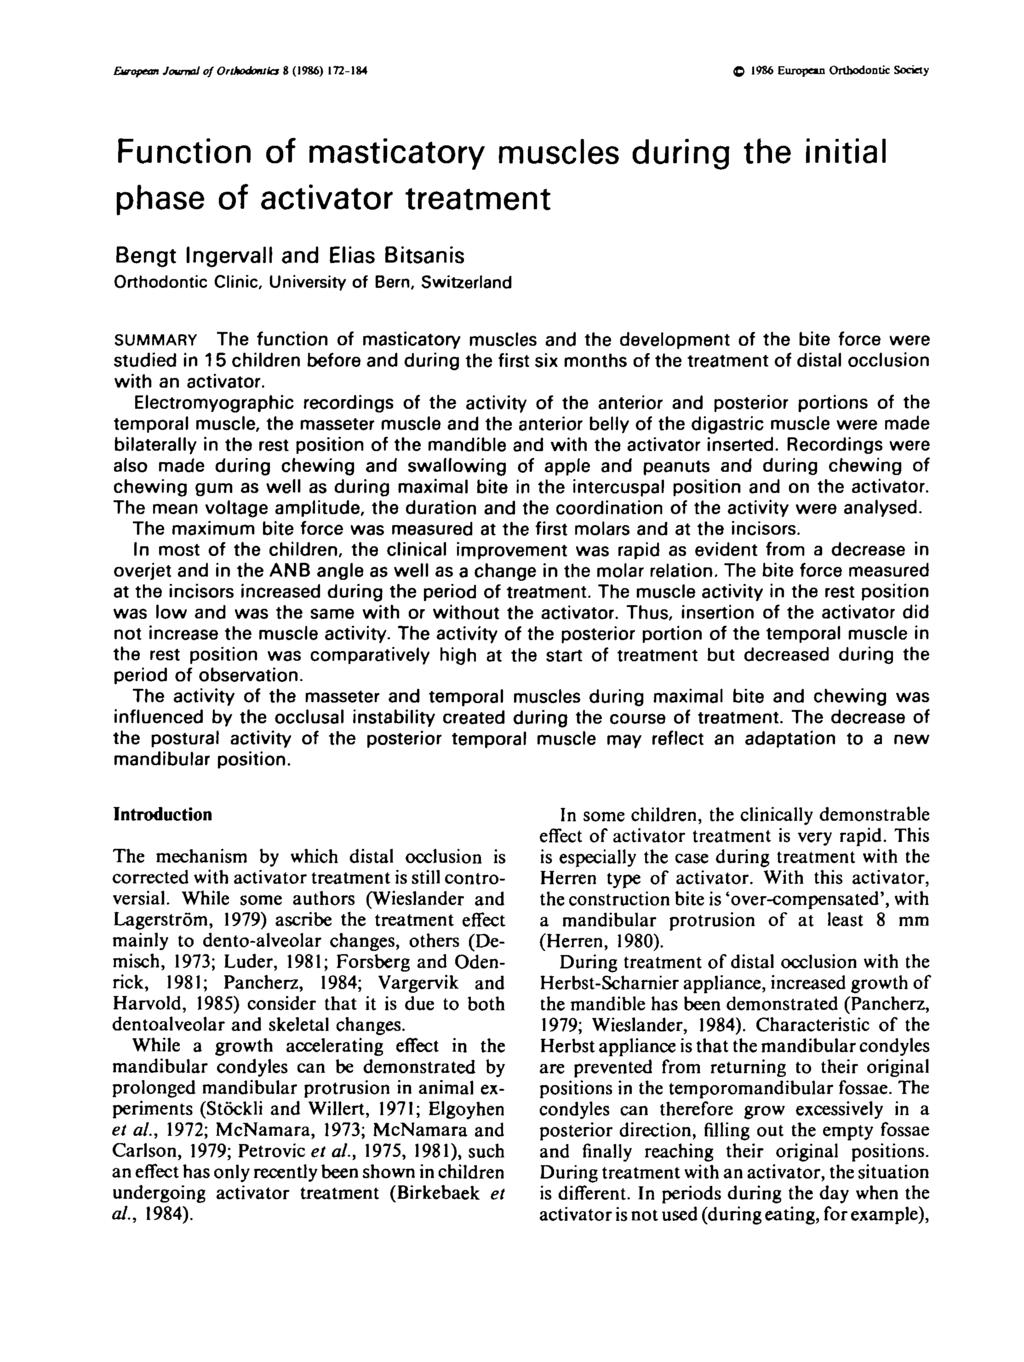 Emoftm Jcmmal of Ortkodcmlla 8 (1986) 172-184 1986 European Orthodontic Society Function of masticatory muscles during the initial phase of activator treatment Bengt Ingervall and Elias Bitsanis